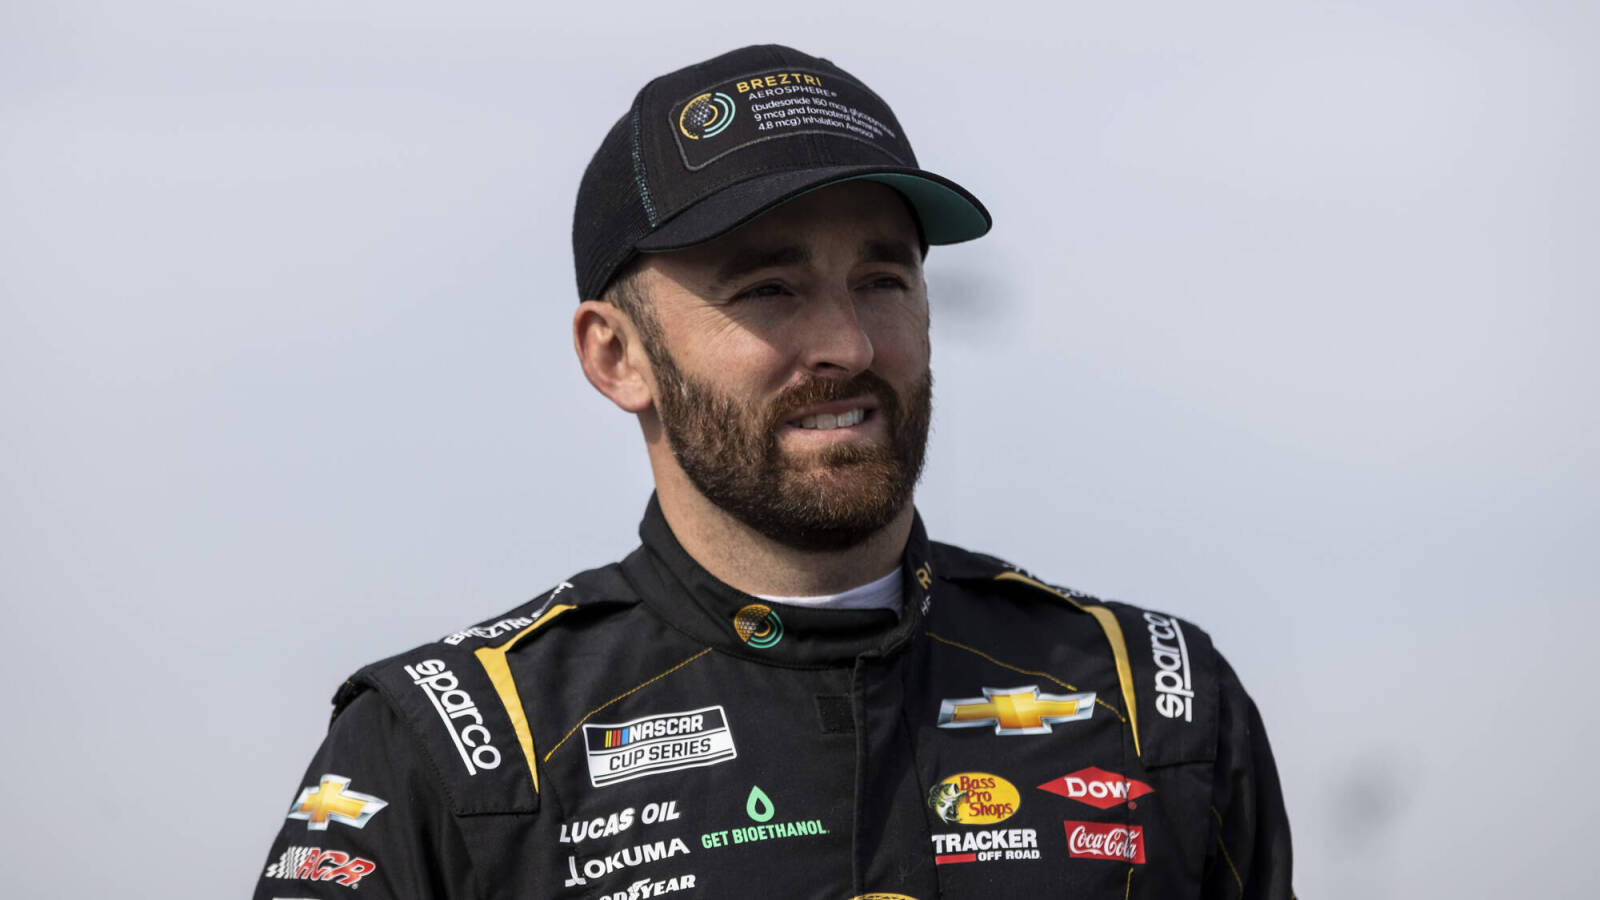 More nightmares at RCR as NASCAR suspends Austin Dillon’s jackman for substance abuse